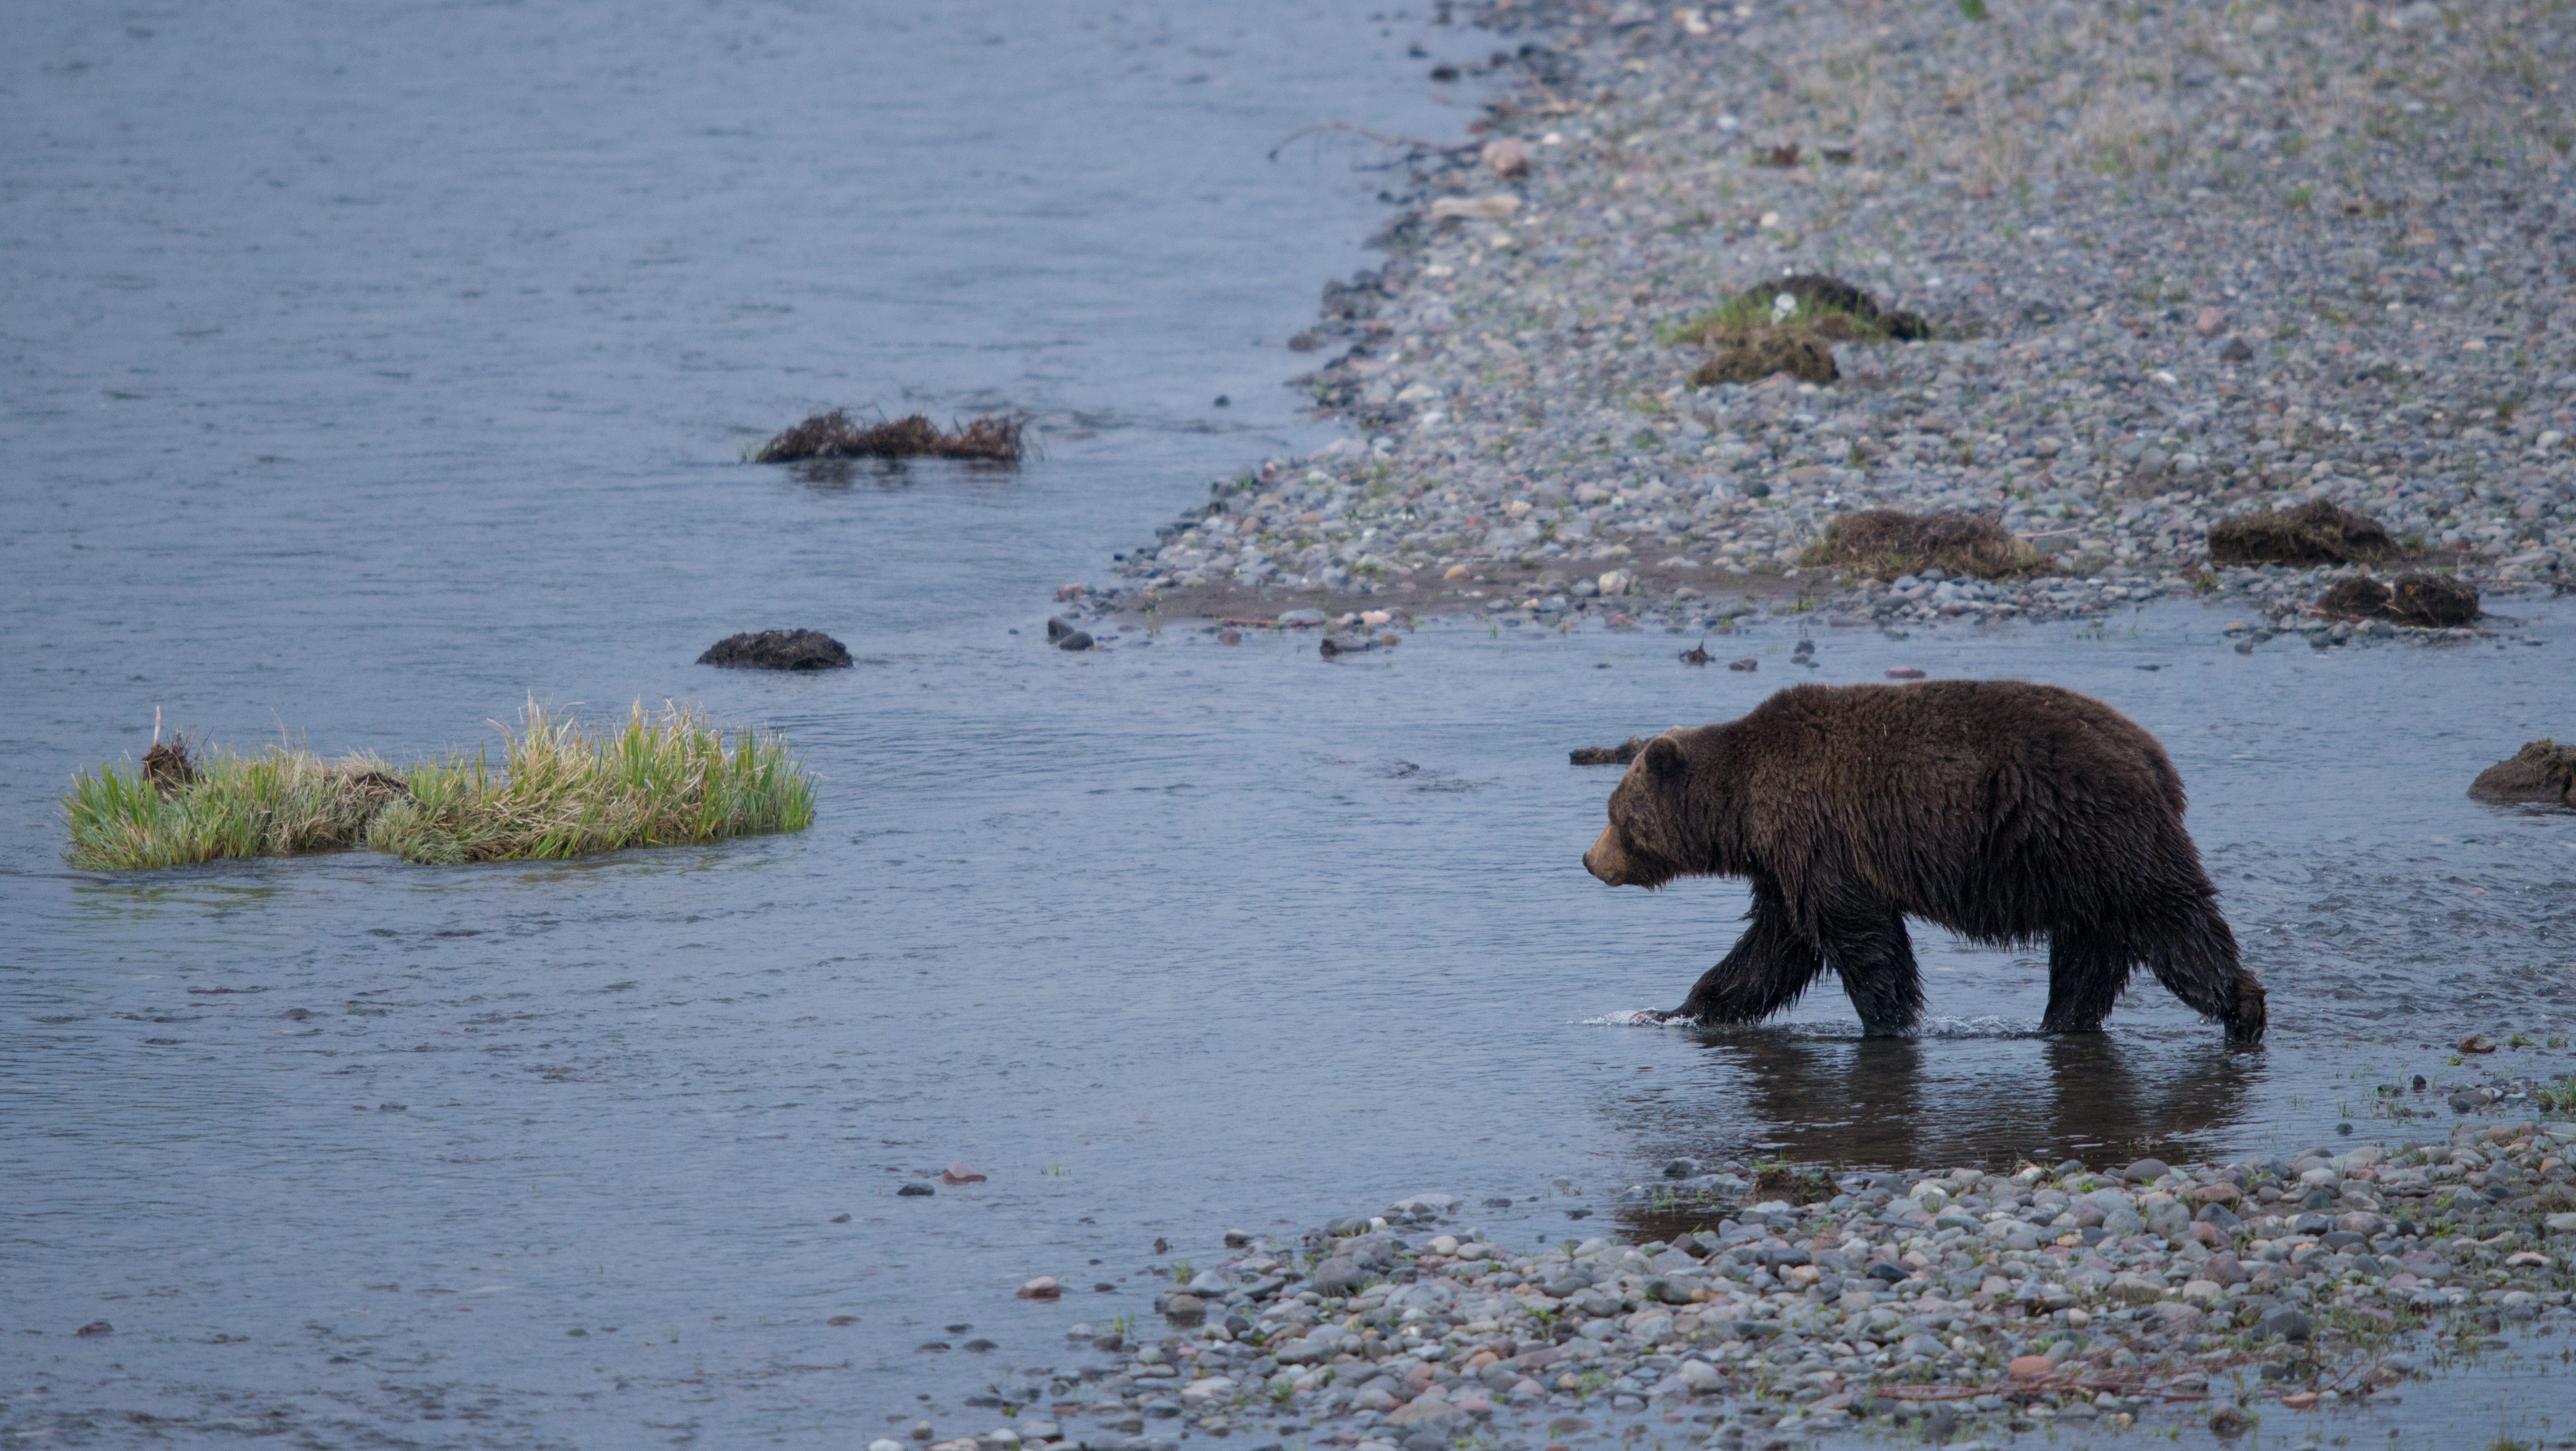 grizzly bear wading in a stream